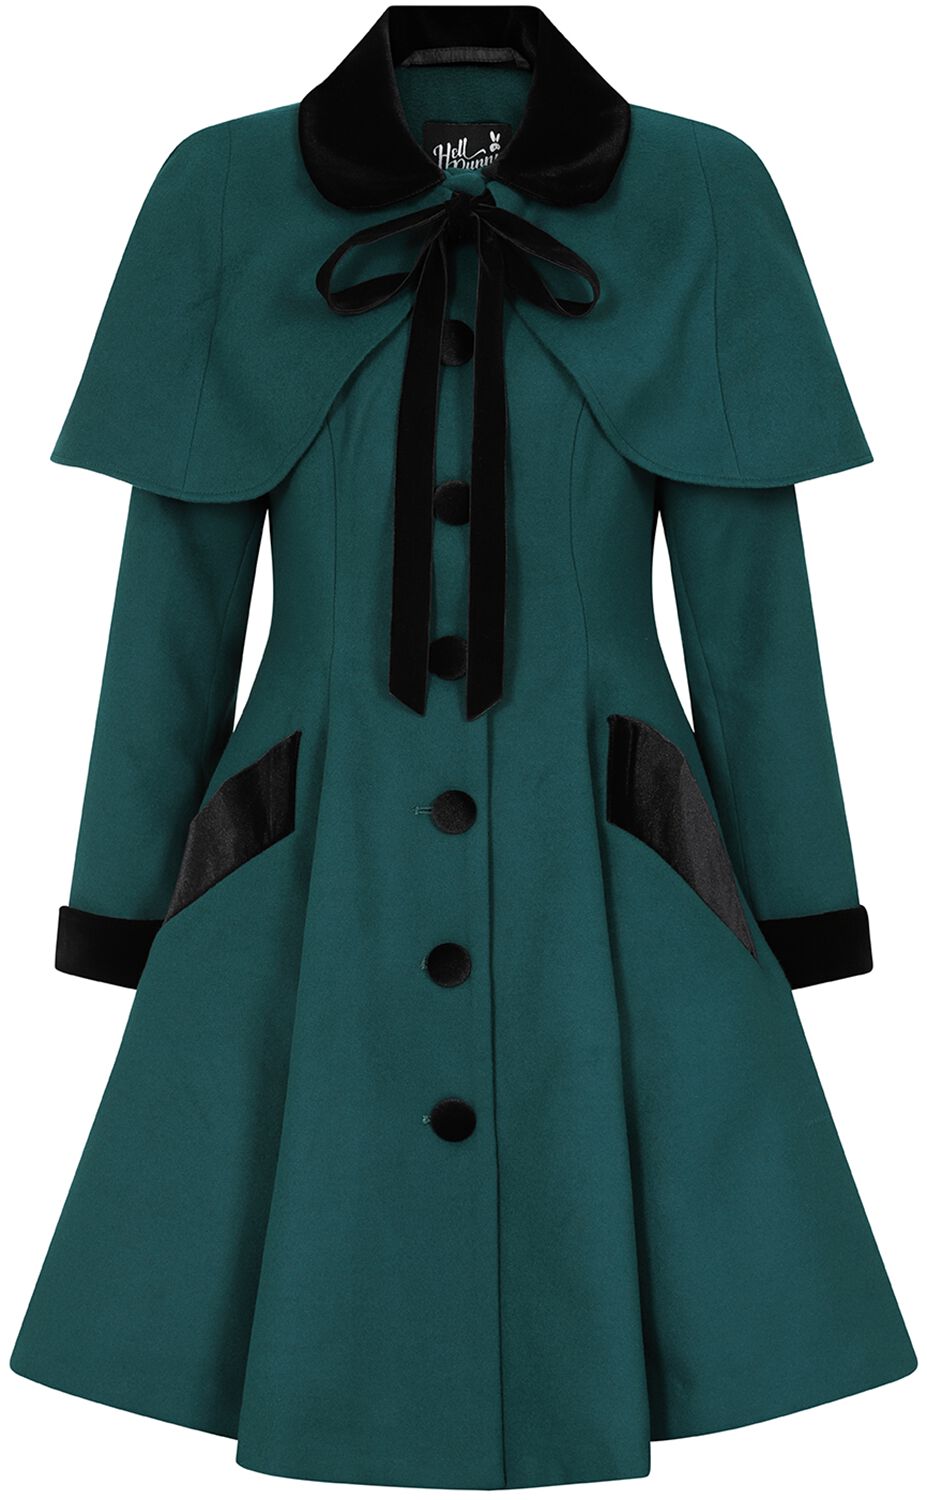 Image of Cappotti Rockabilly di Hell Bunny - Anouk coat - S a 4XL - Donna - verde/nero